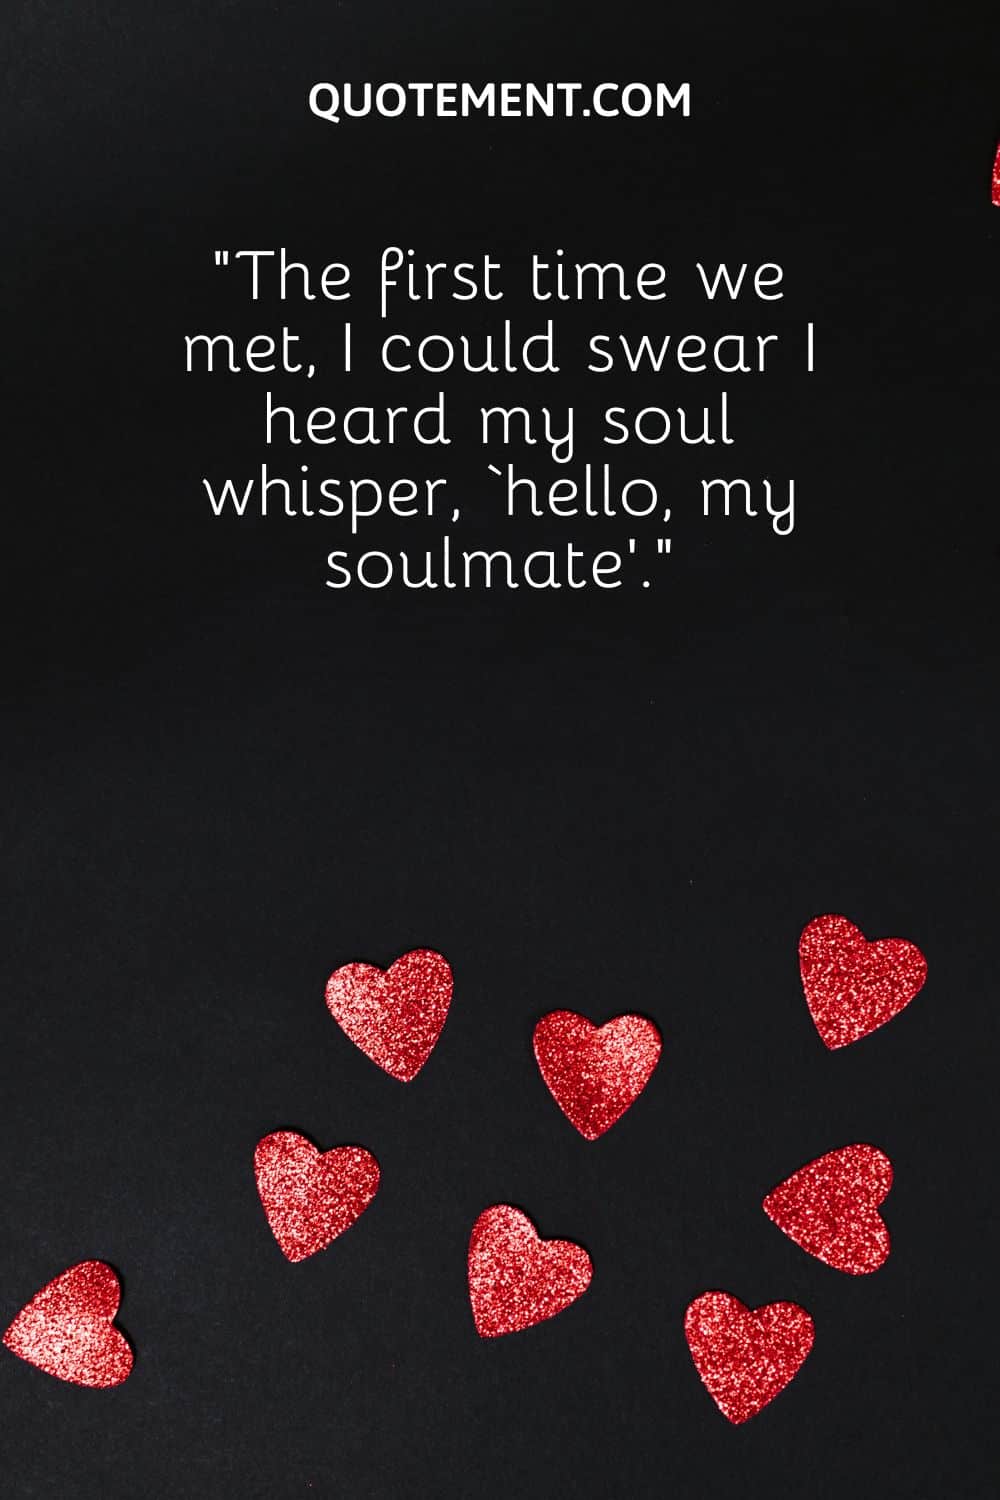 “The first time we met, I could swear I heard my soul whisper, ‘hello, my soulmate’.”